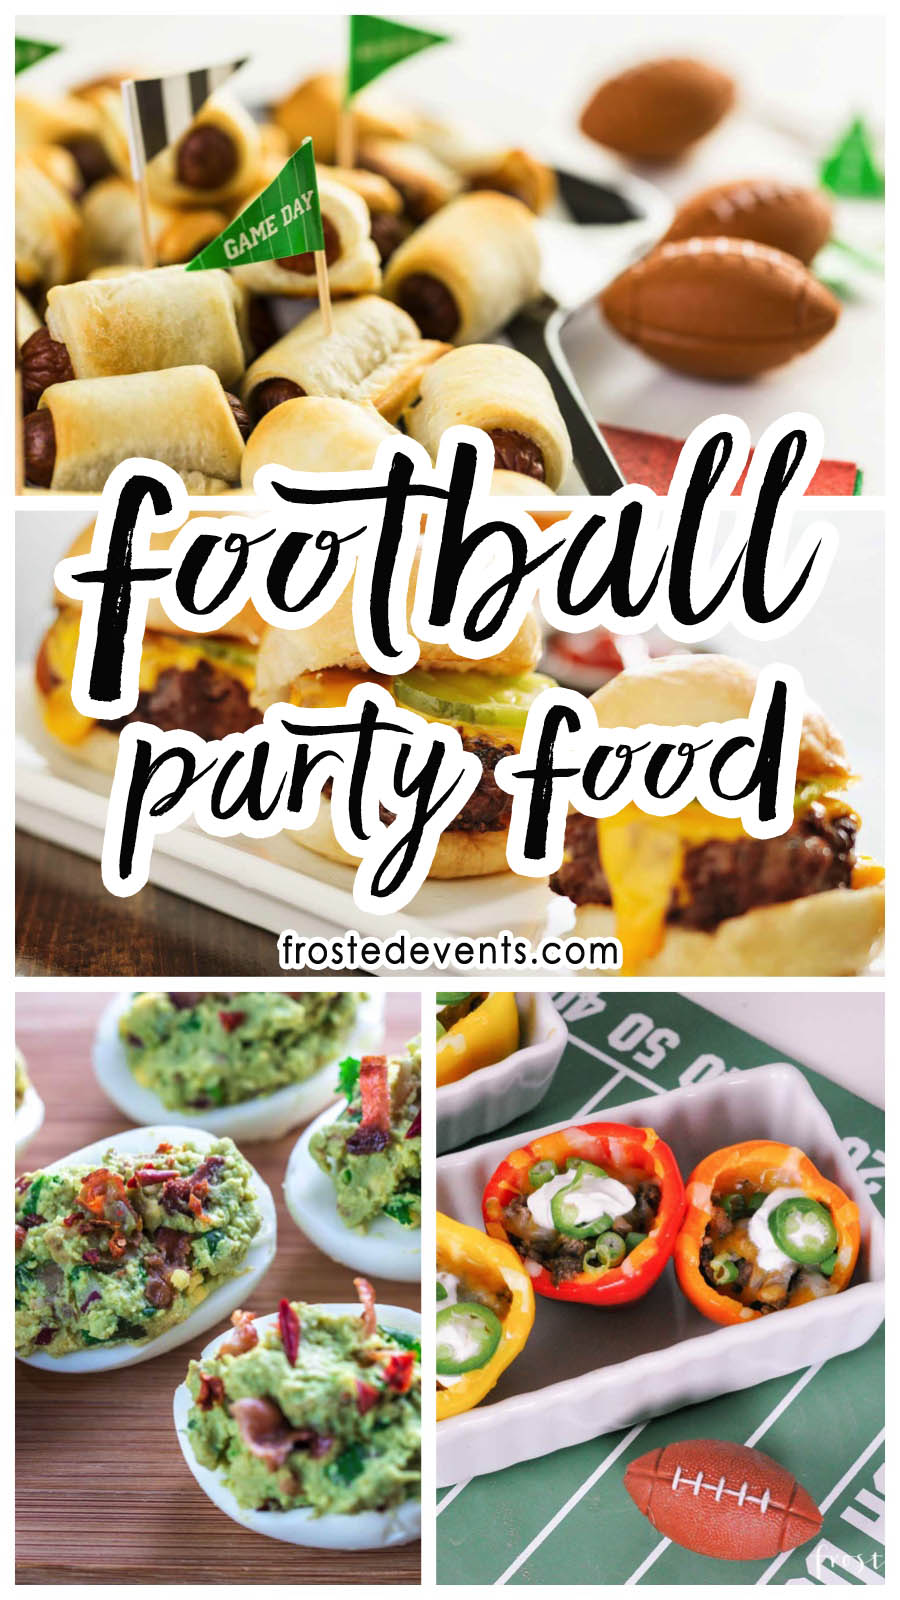 Football Party Food Snack Ideas and Party Appetizers for Super Bowl Party via frostedevents